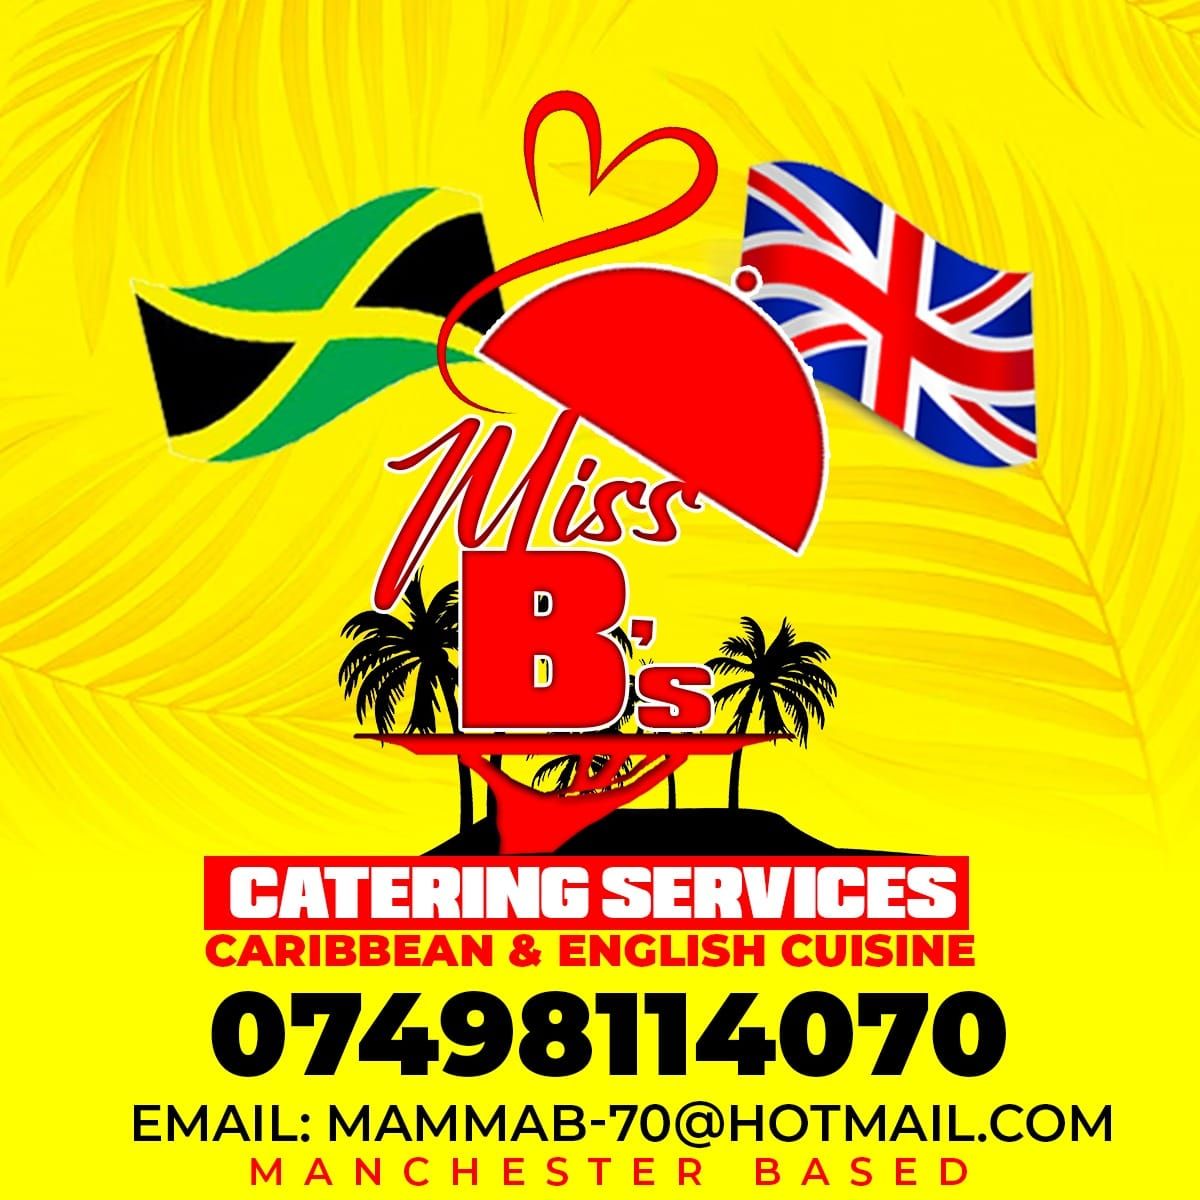 MISS B's CATERING SERVICES 10TH YEAR BUSINESS ANNIVERSARY BRUNCH